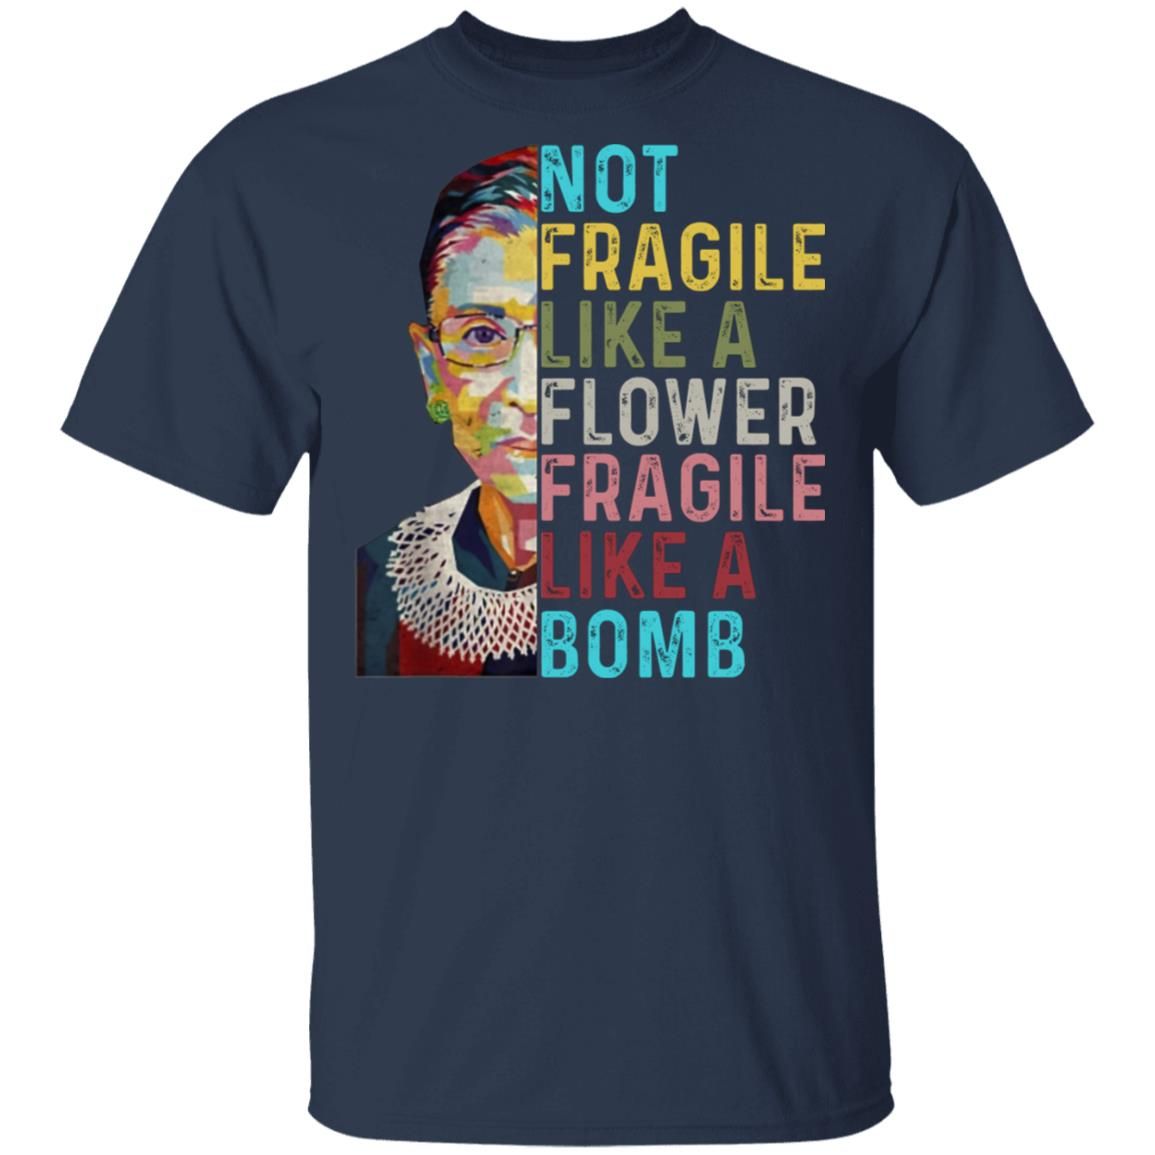 Not Fragile Like A Flower But A Bomb Ruth Ginsburg Rbg Graphic Tee Shirt Style: Gildan Ultra Cotton T-Shirt, Color: Navy